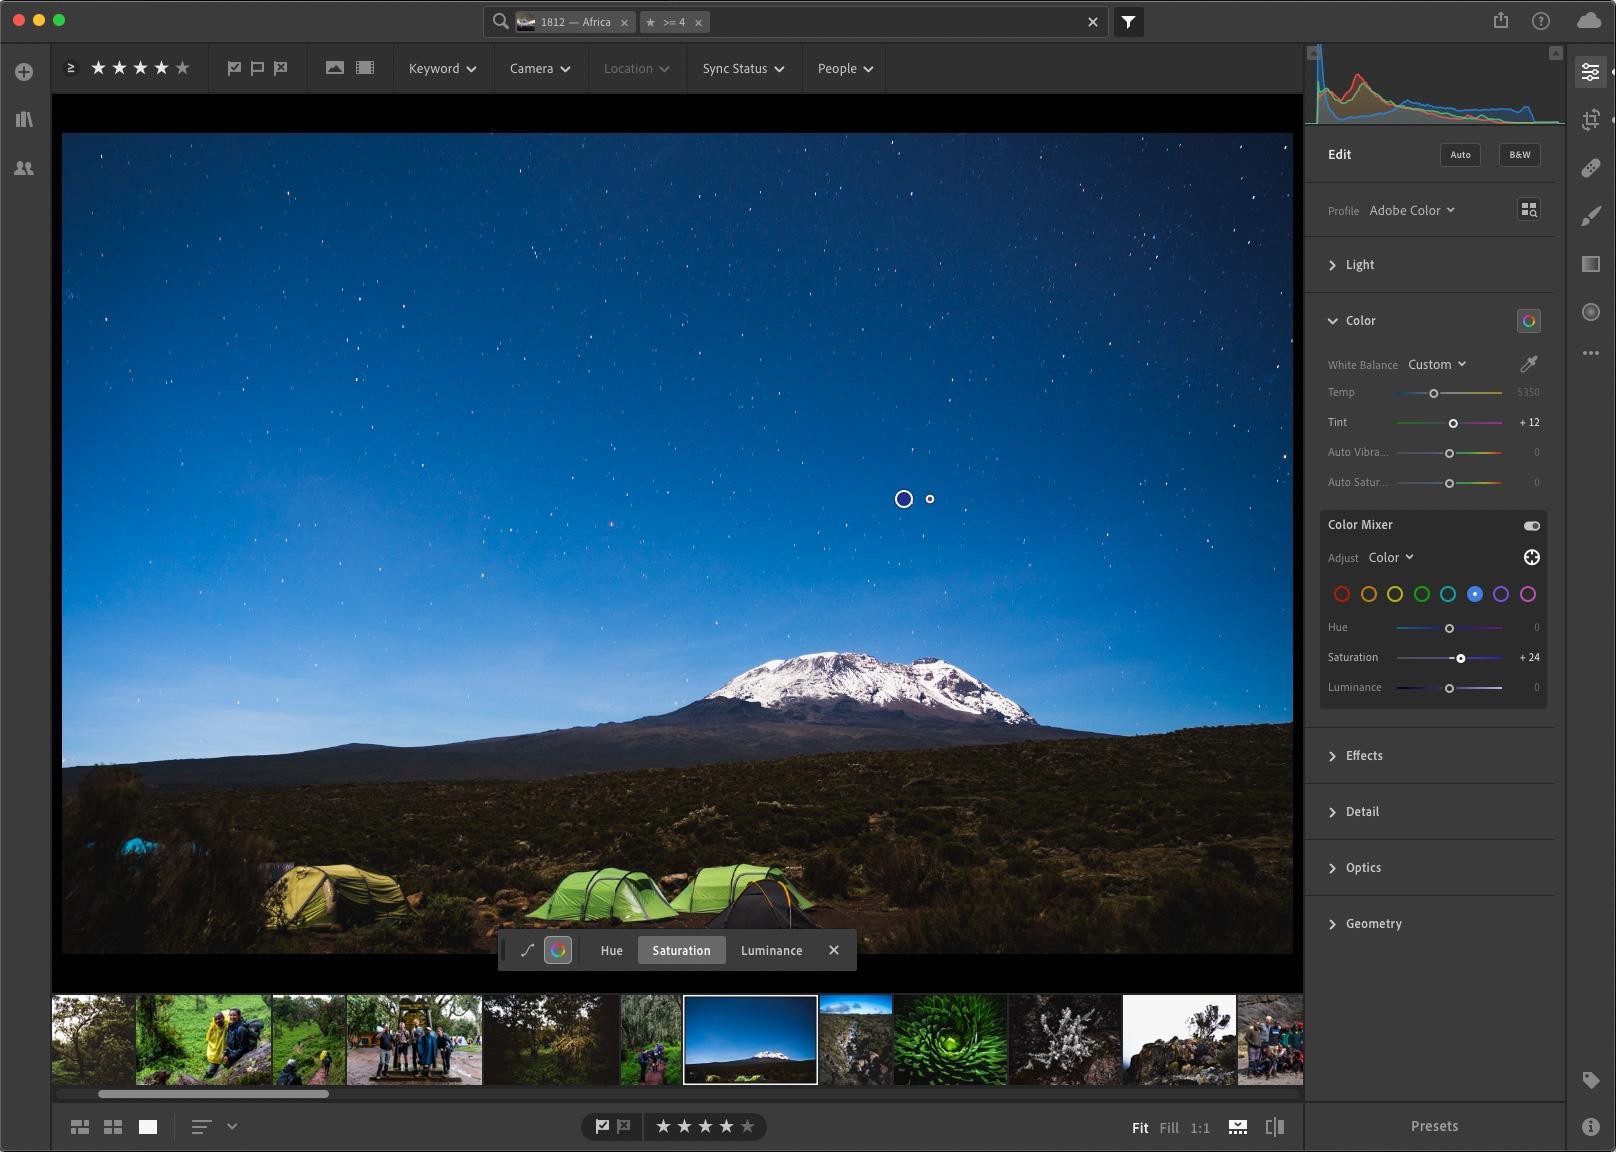 Adobe Lightroom's Latest Update Should Play Well with Fujifilm RAW Files